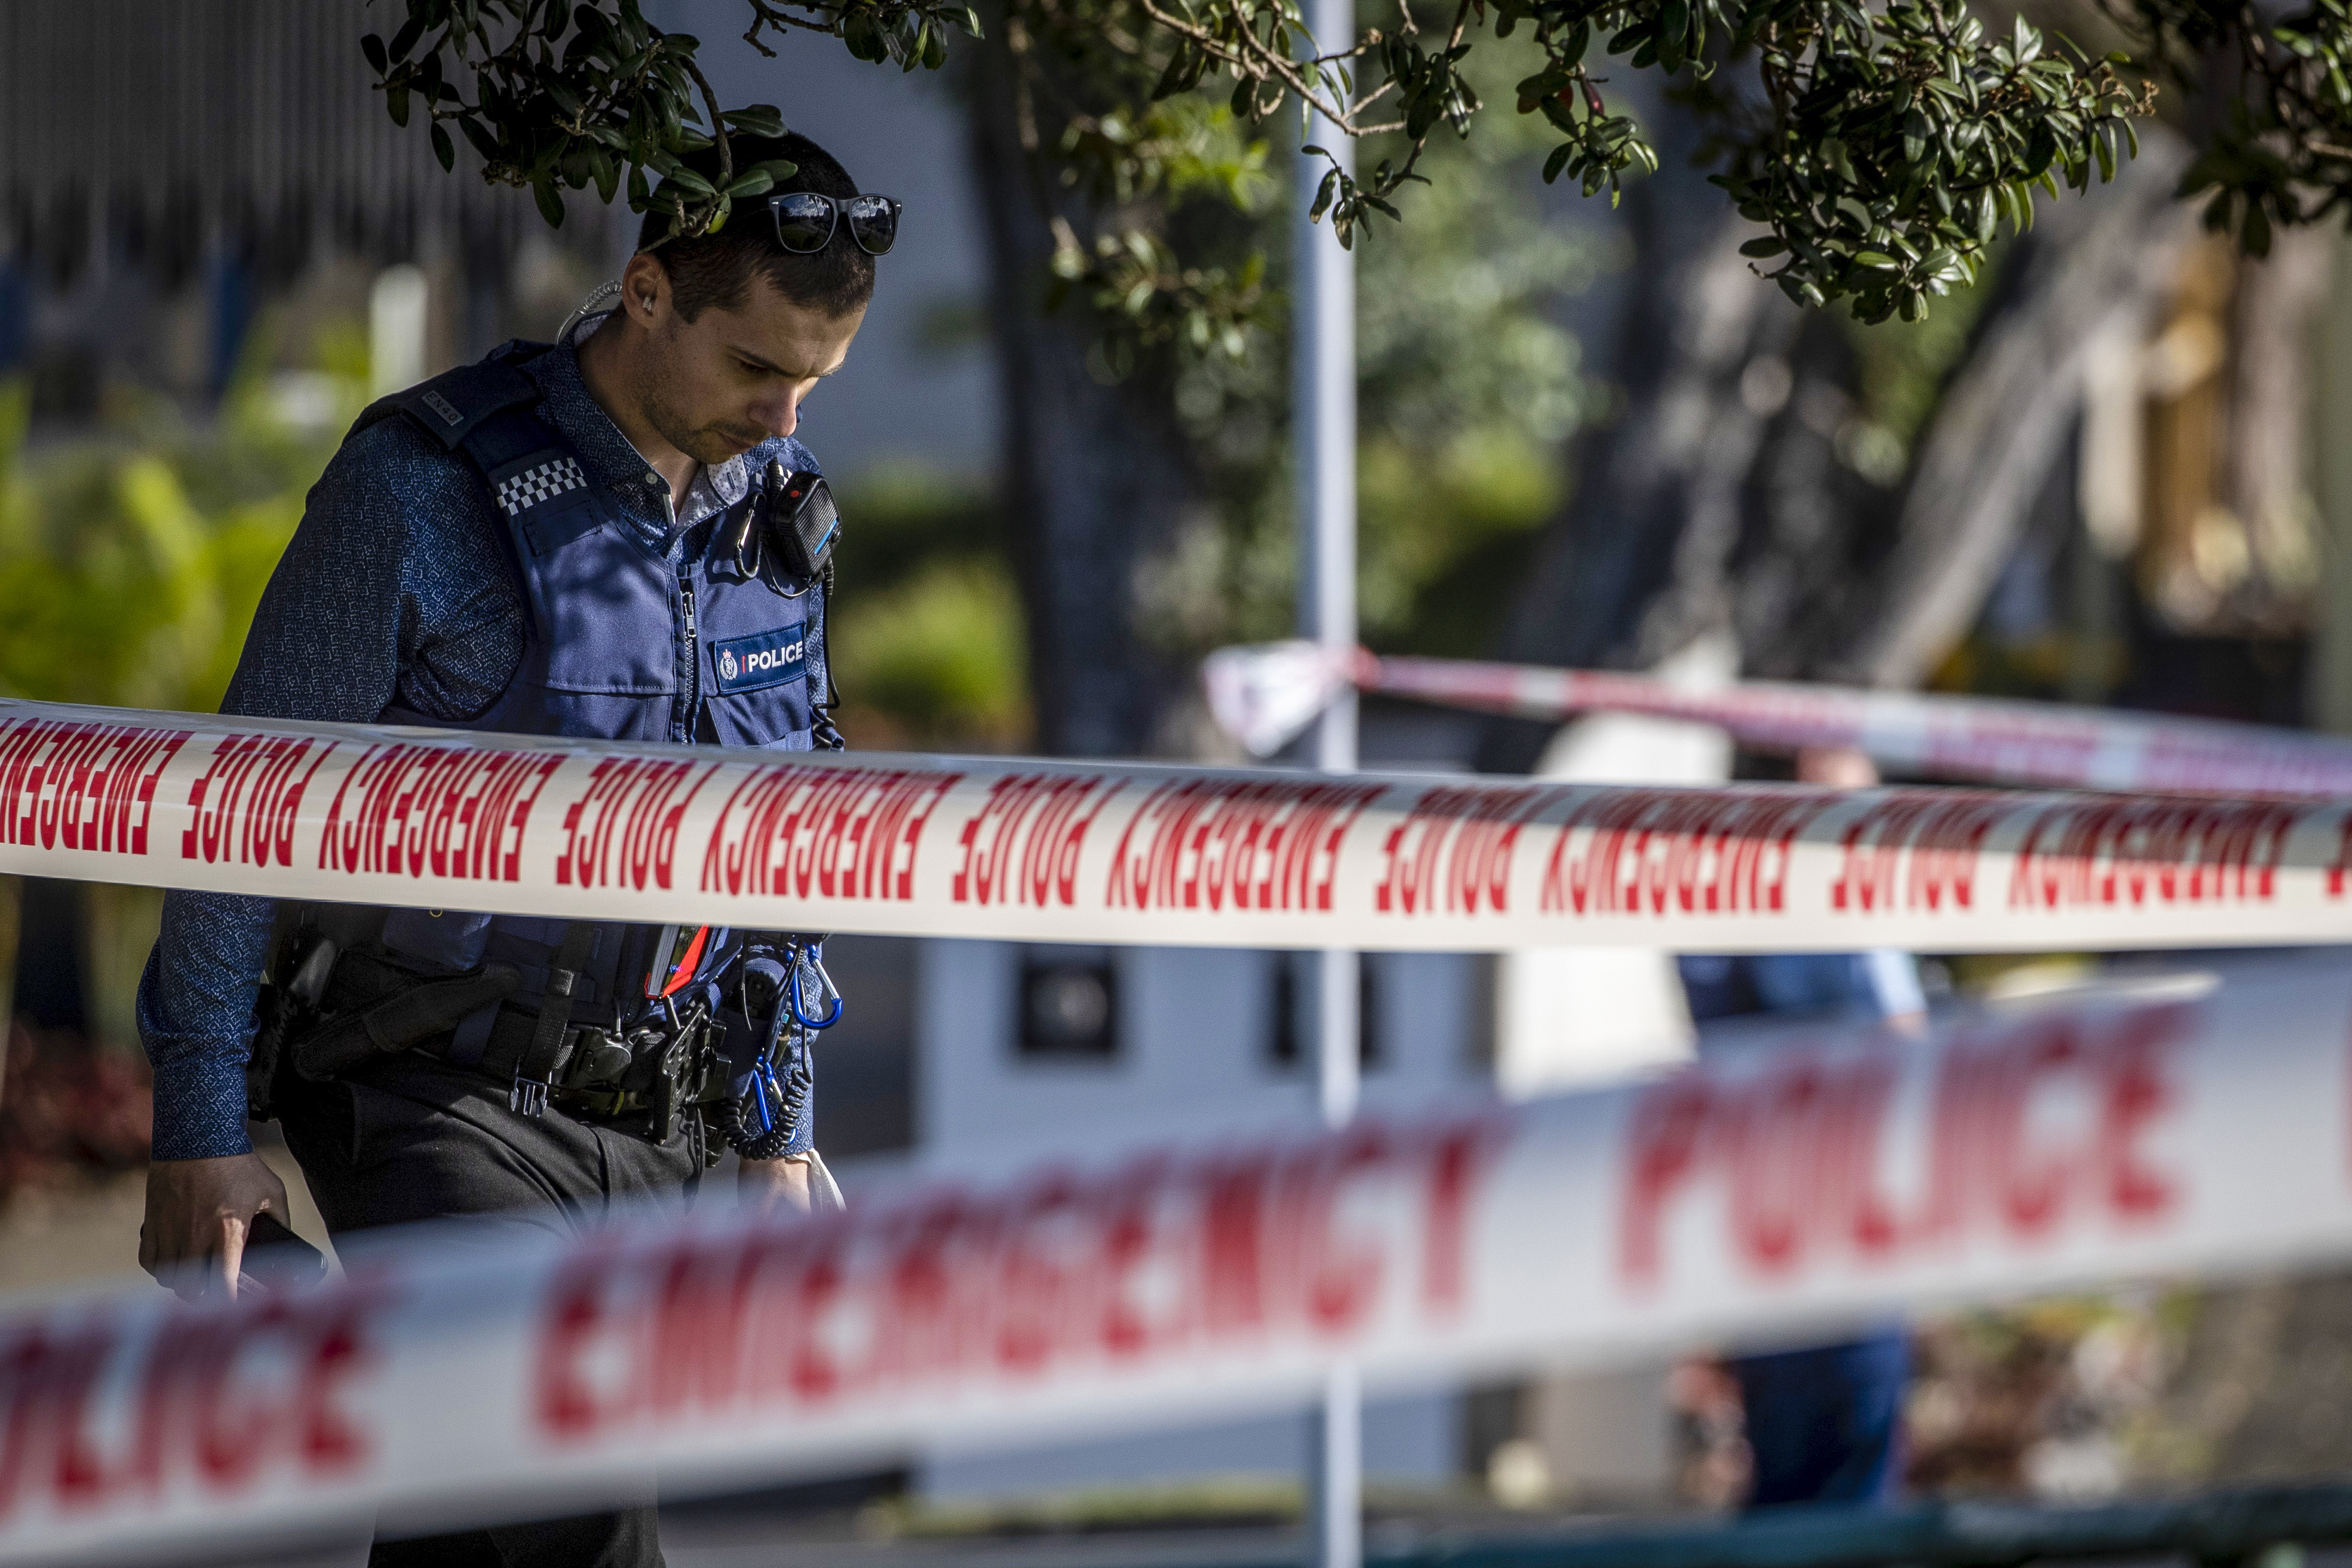 Police set up a cordon and search area in a suburb of Auckland following reports of multiple stabbings